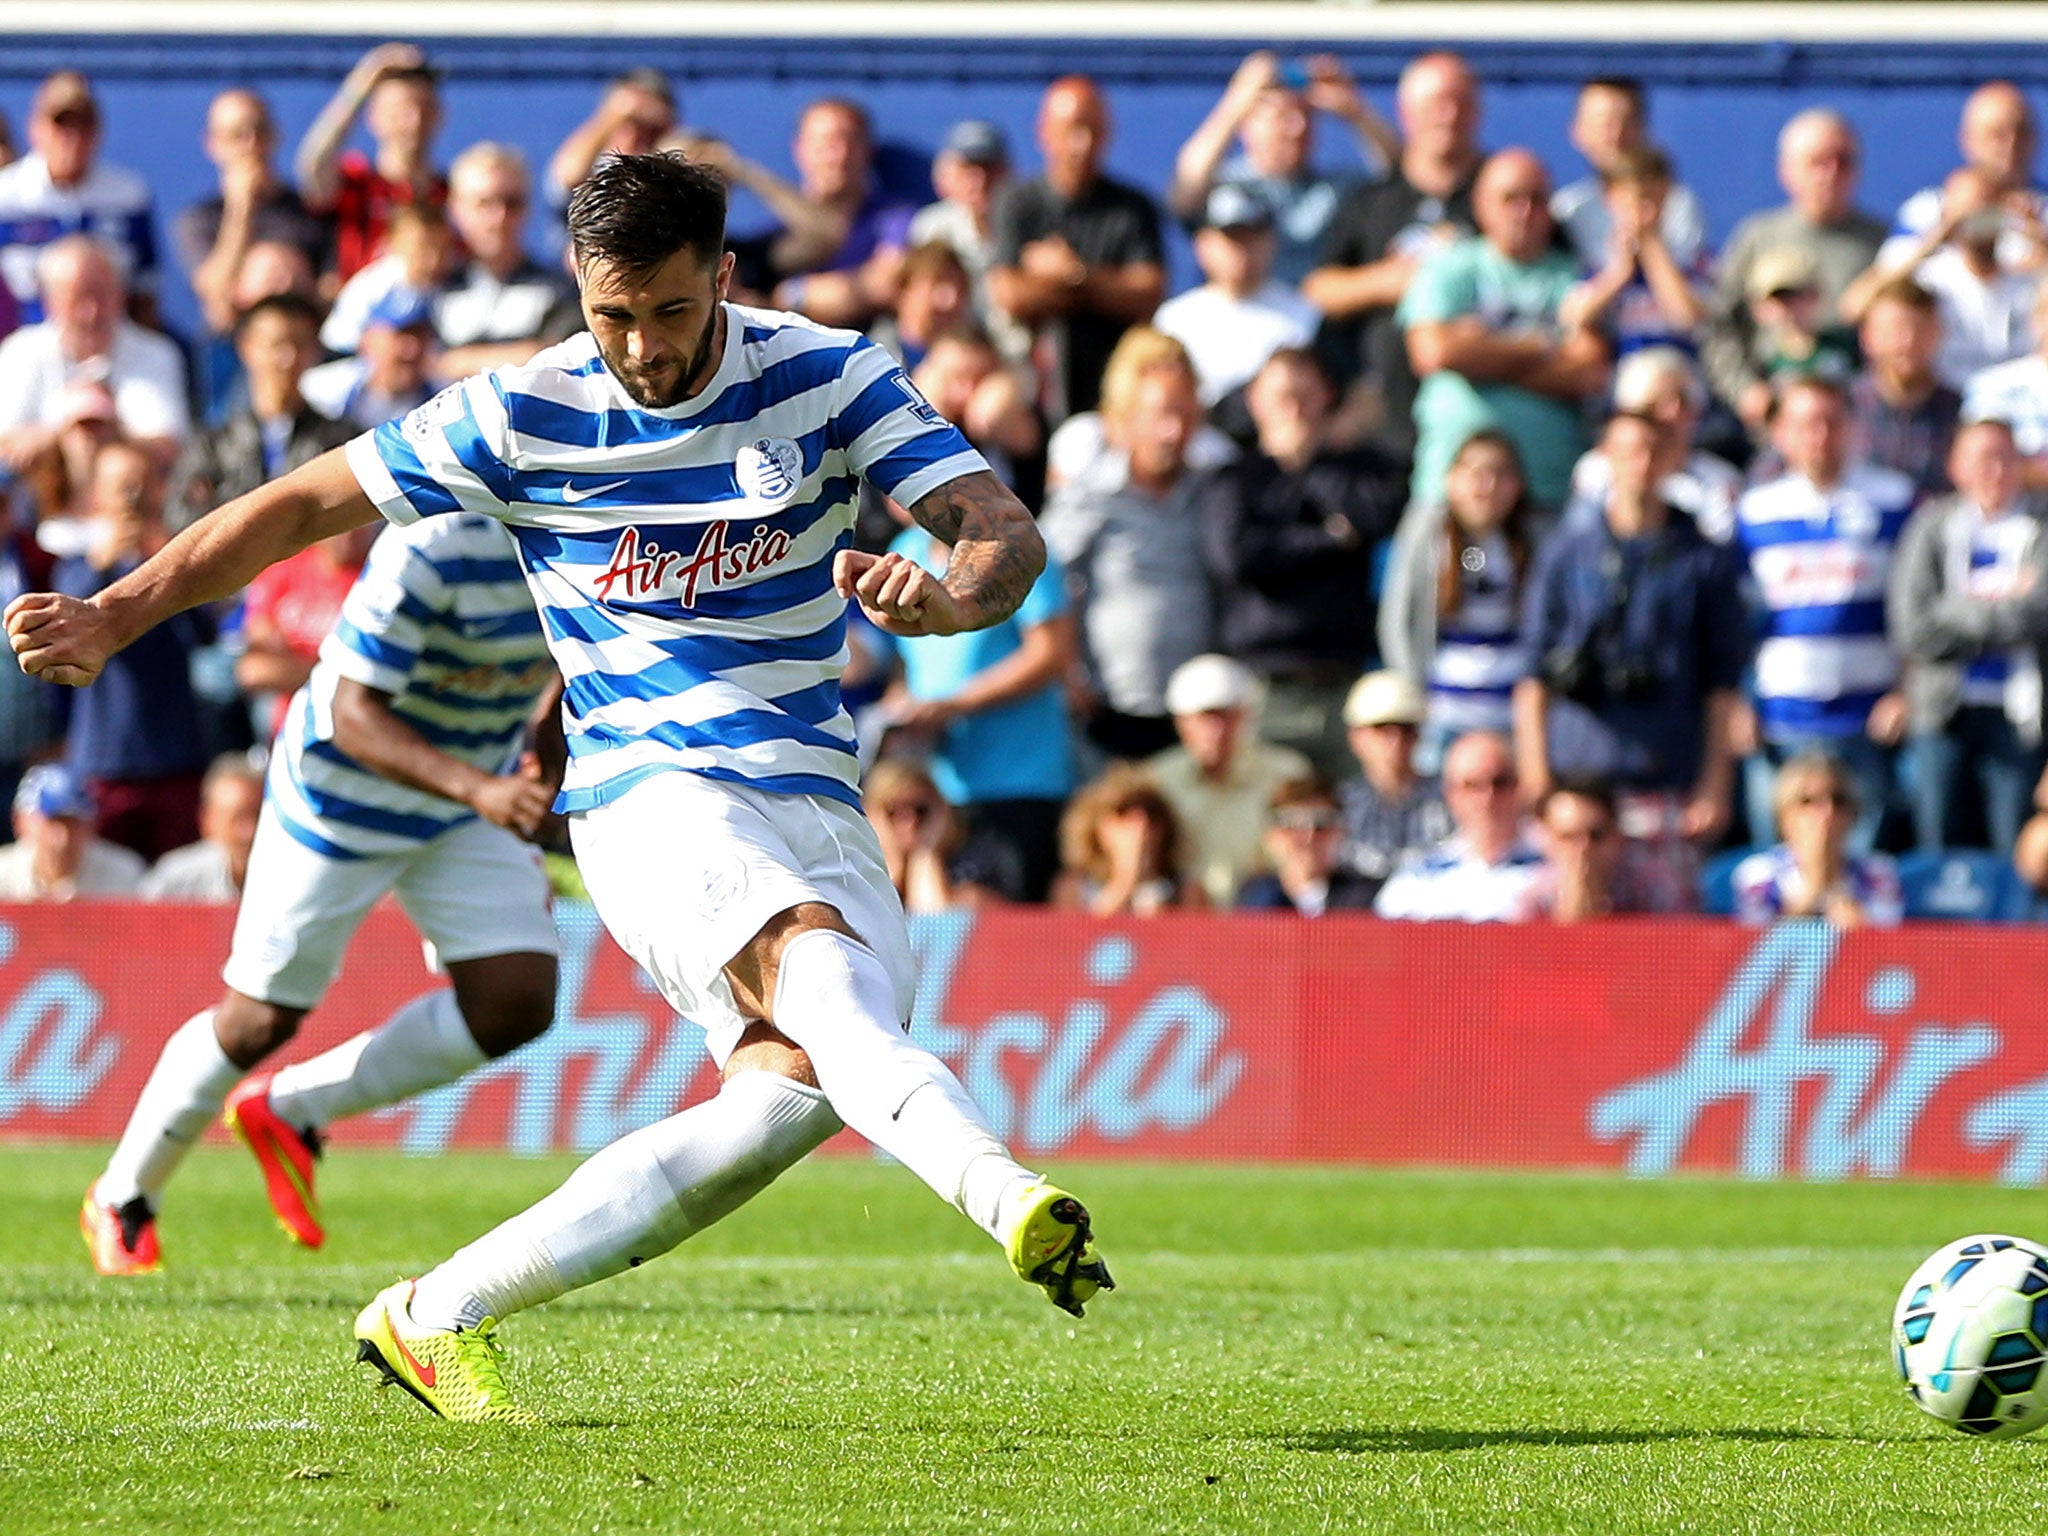 Charlie Austin, last season's top scorer for QPR, saw a late penalty that would have earned a point for the home side saved on the opening day of the season